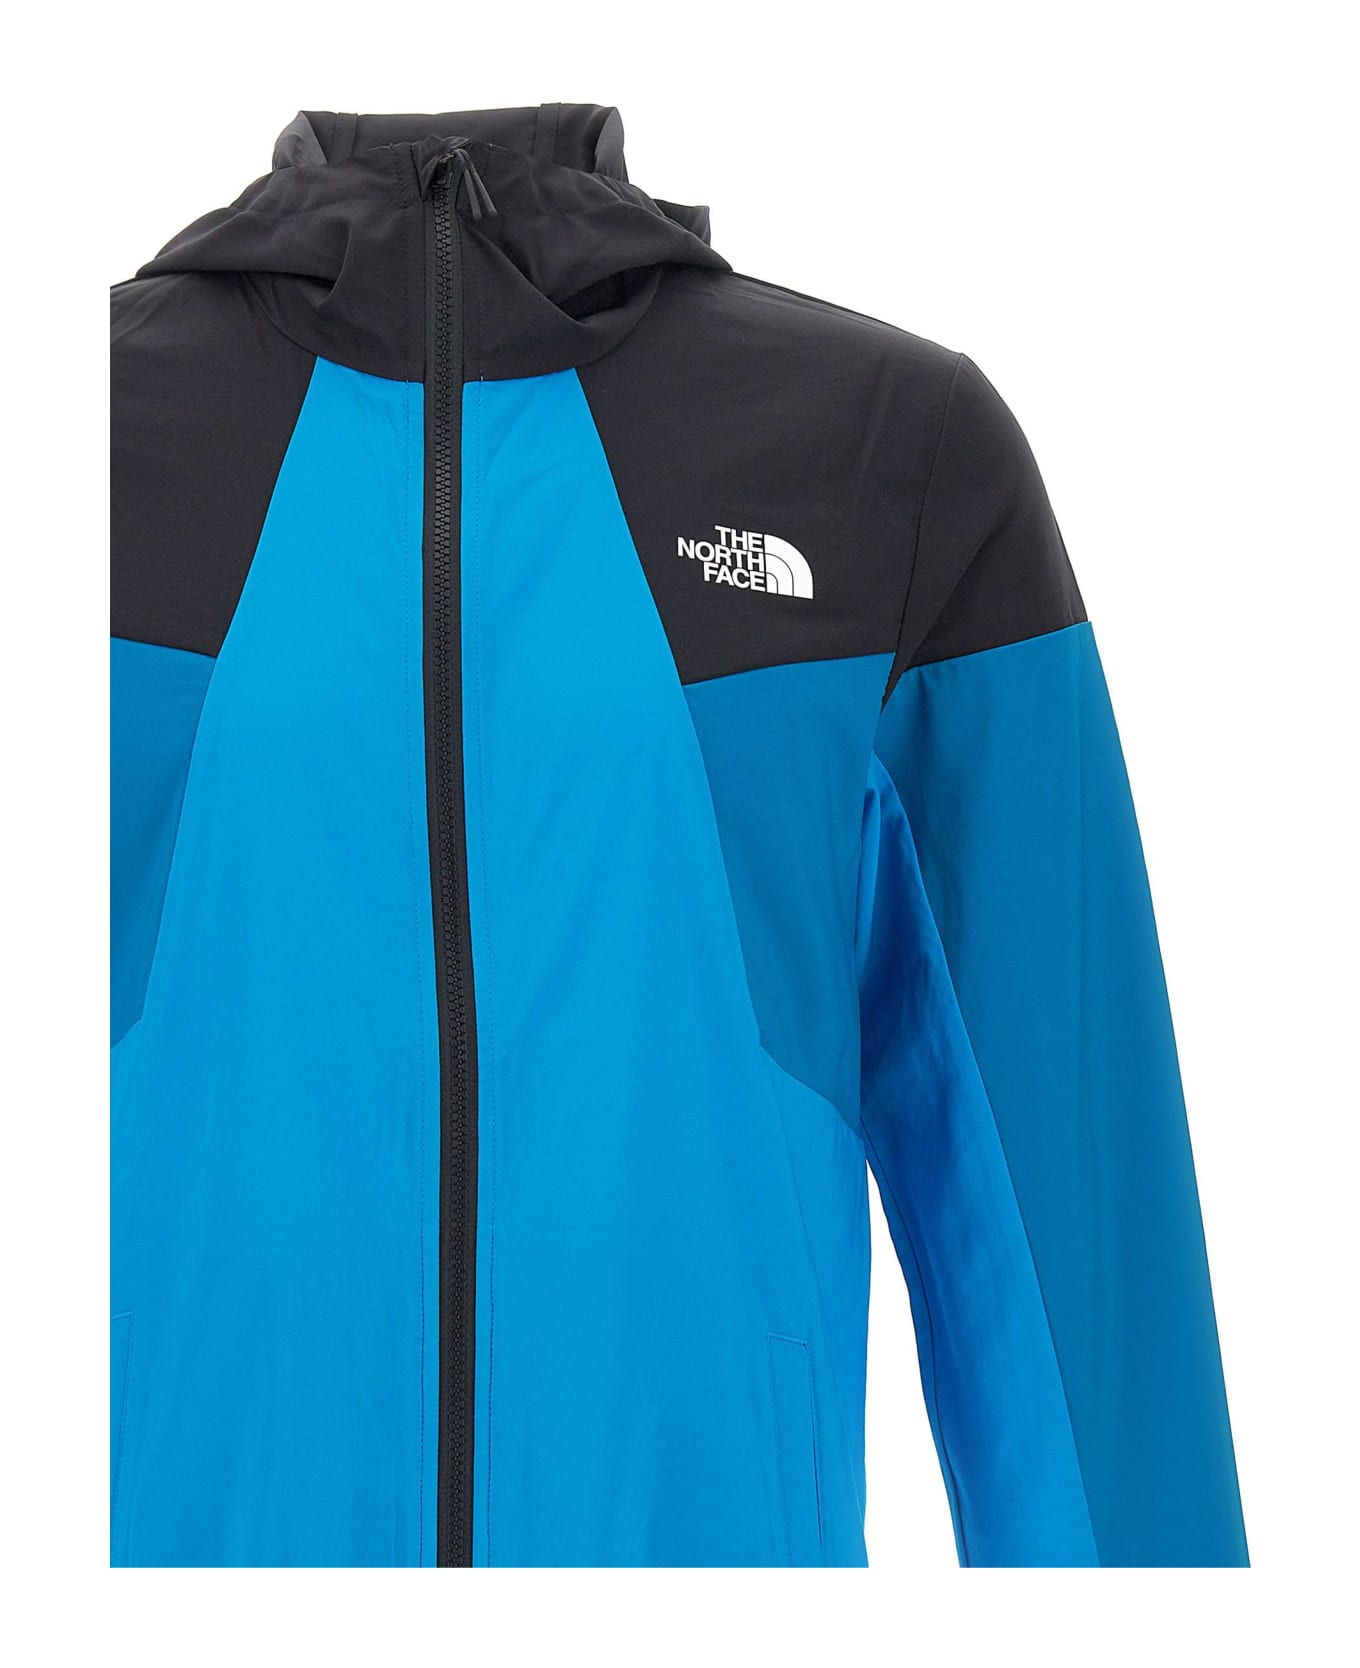 The North Face "wind Track" Jacket - BLUE